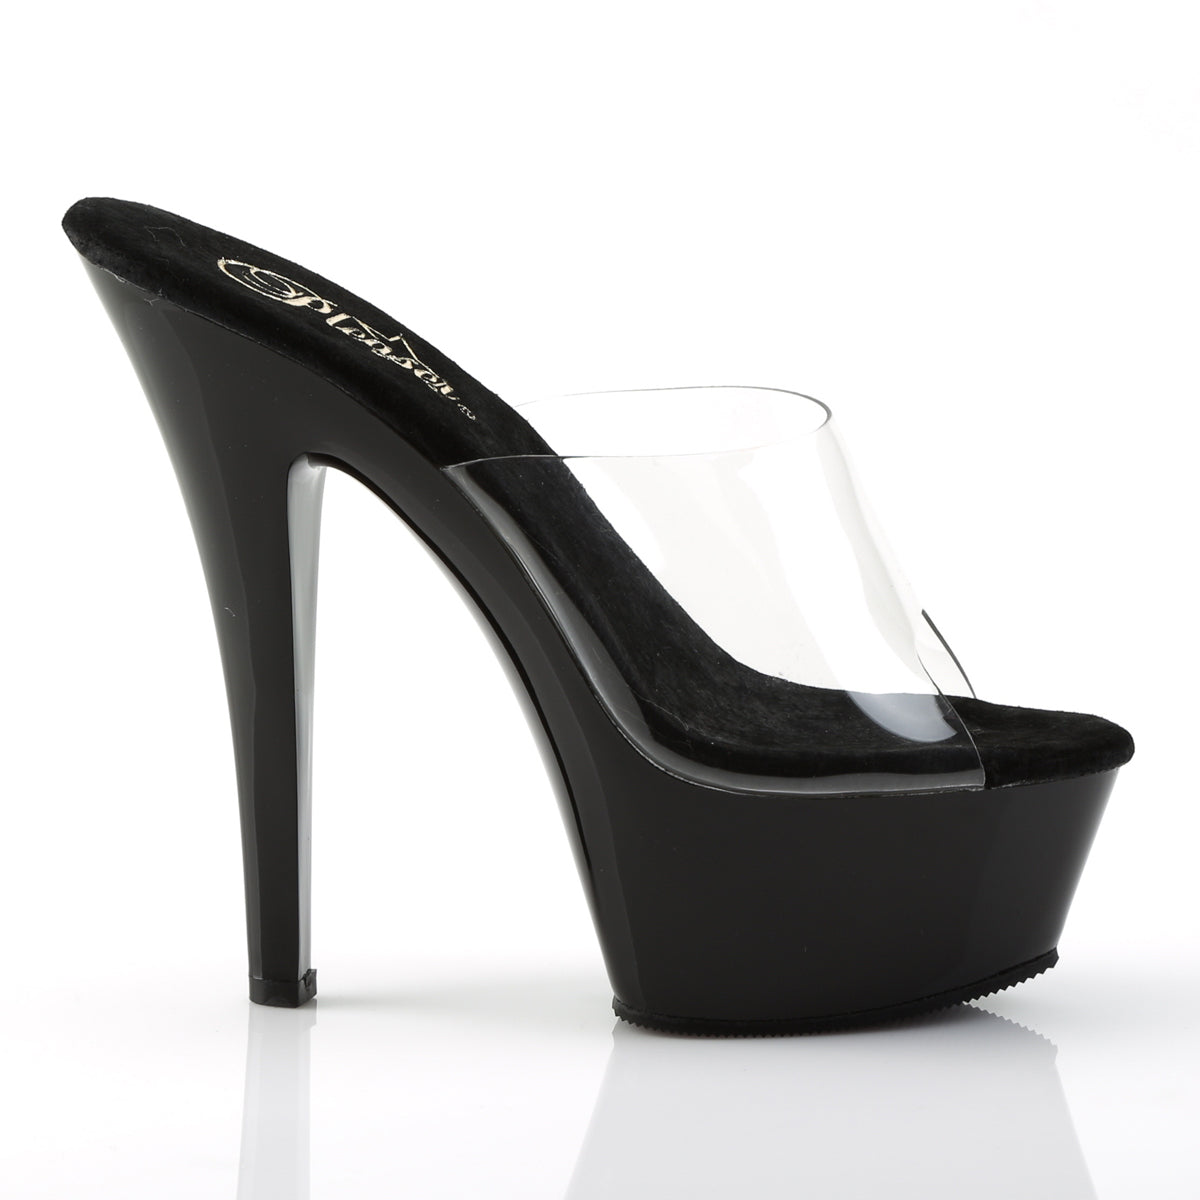 KISS-201 6" Heel Clear and Black Pole Dancing Platforms-Pleaser- Sexy Shoes Fetish Heels